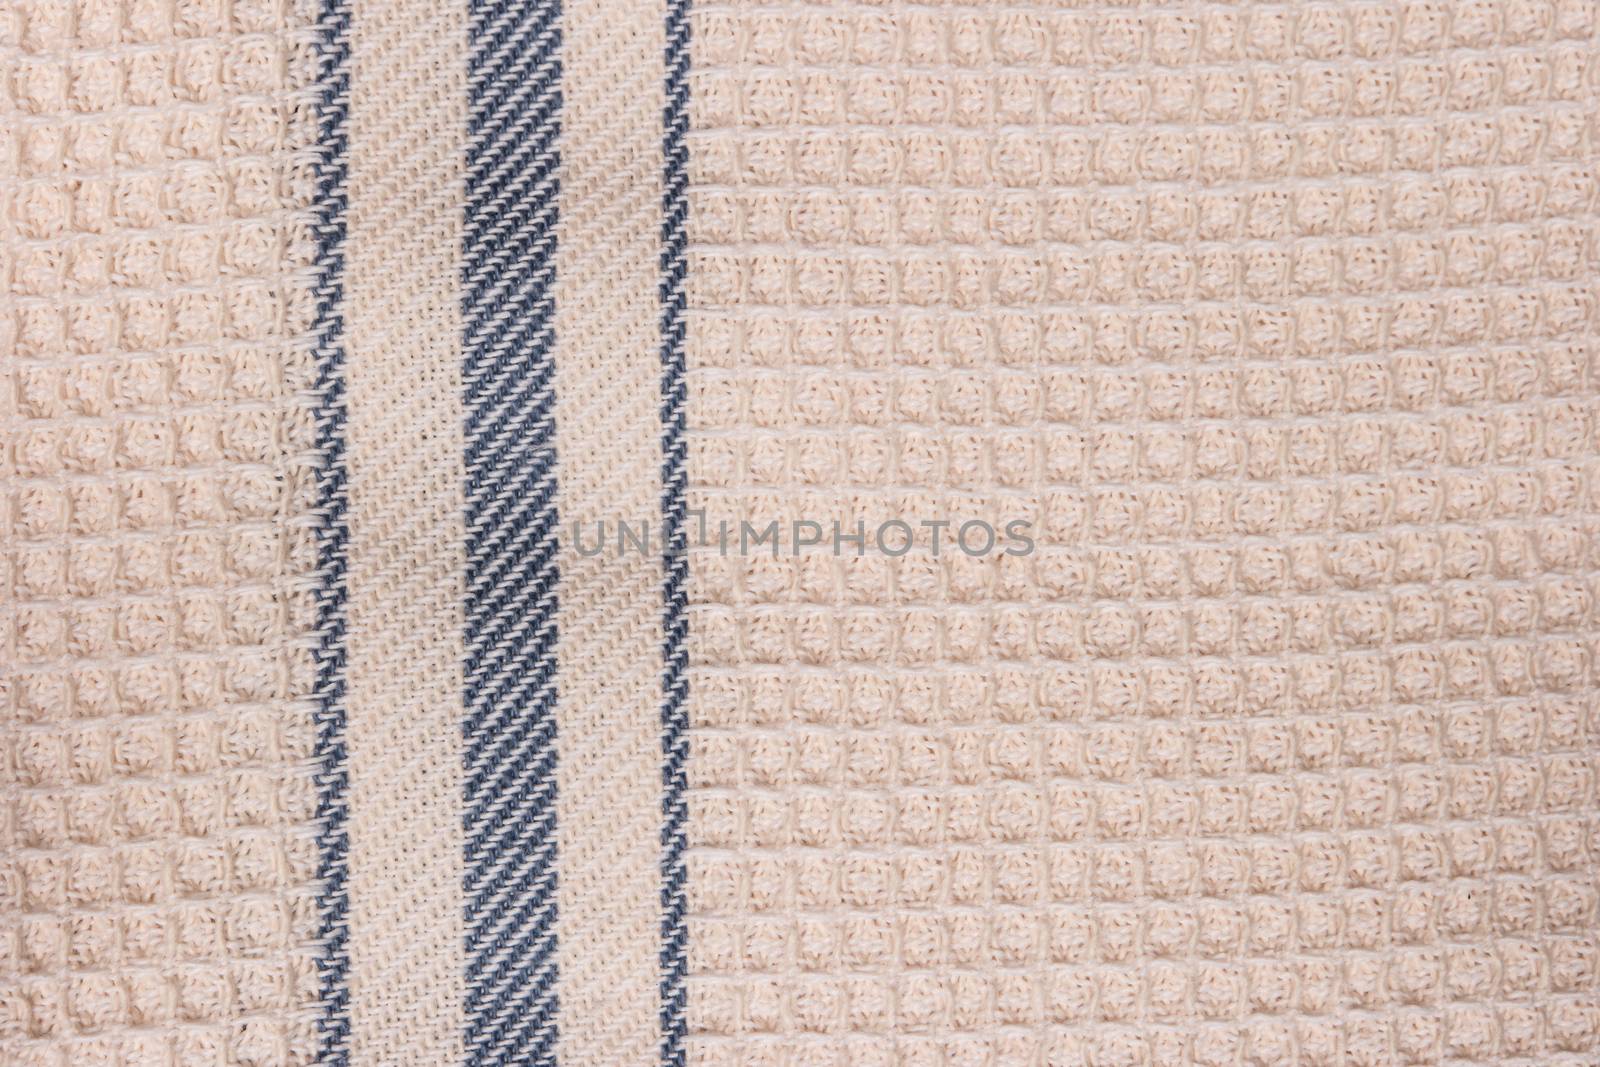 Striped towel fabric cotton texture closeup by AnaMarques